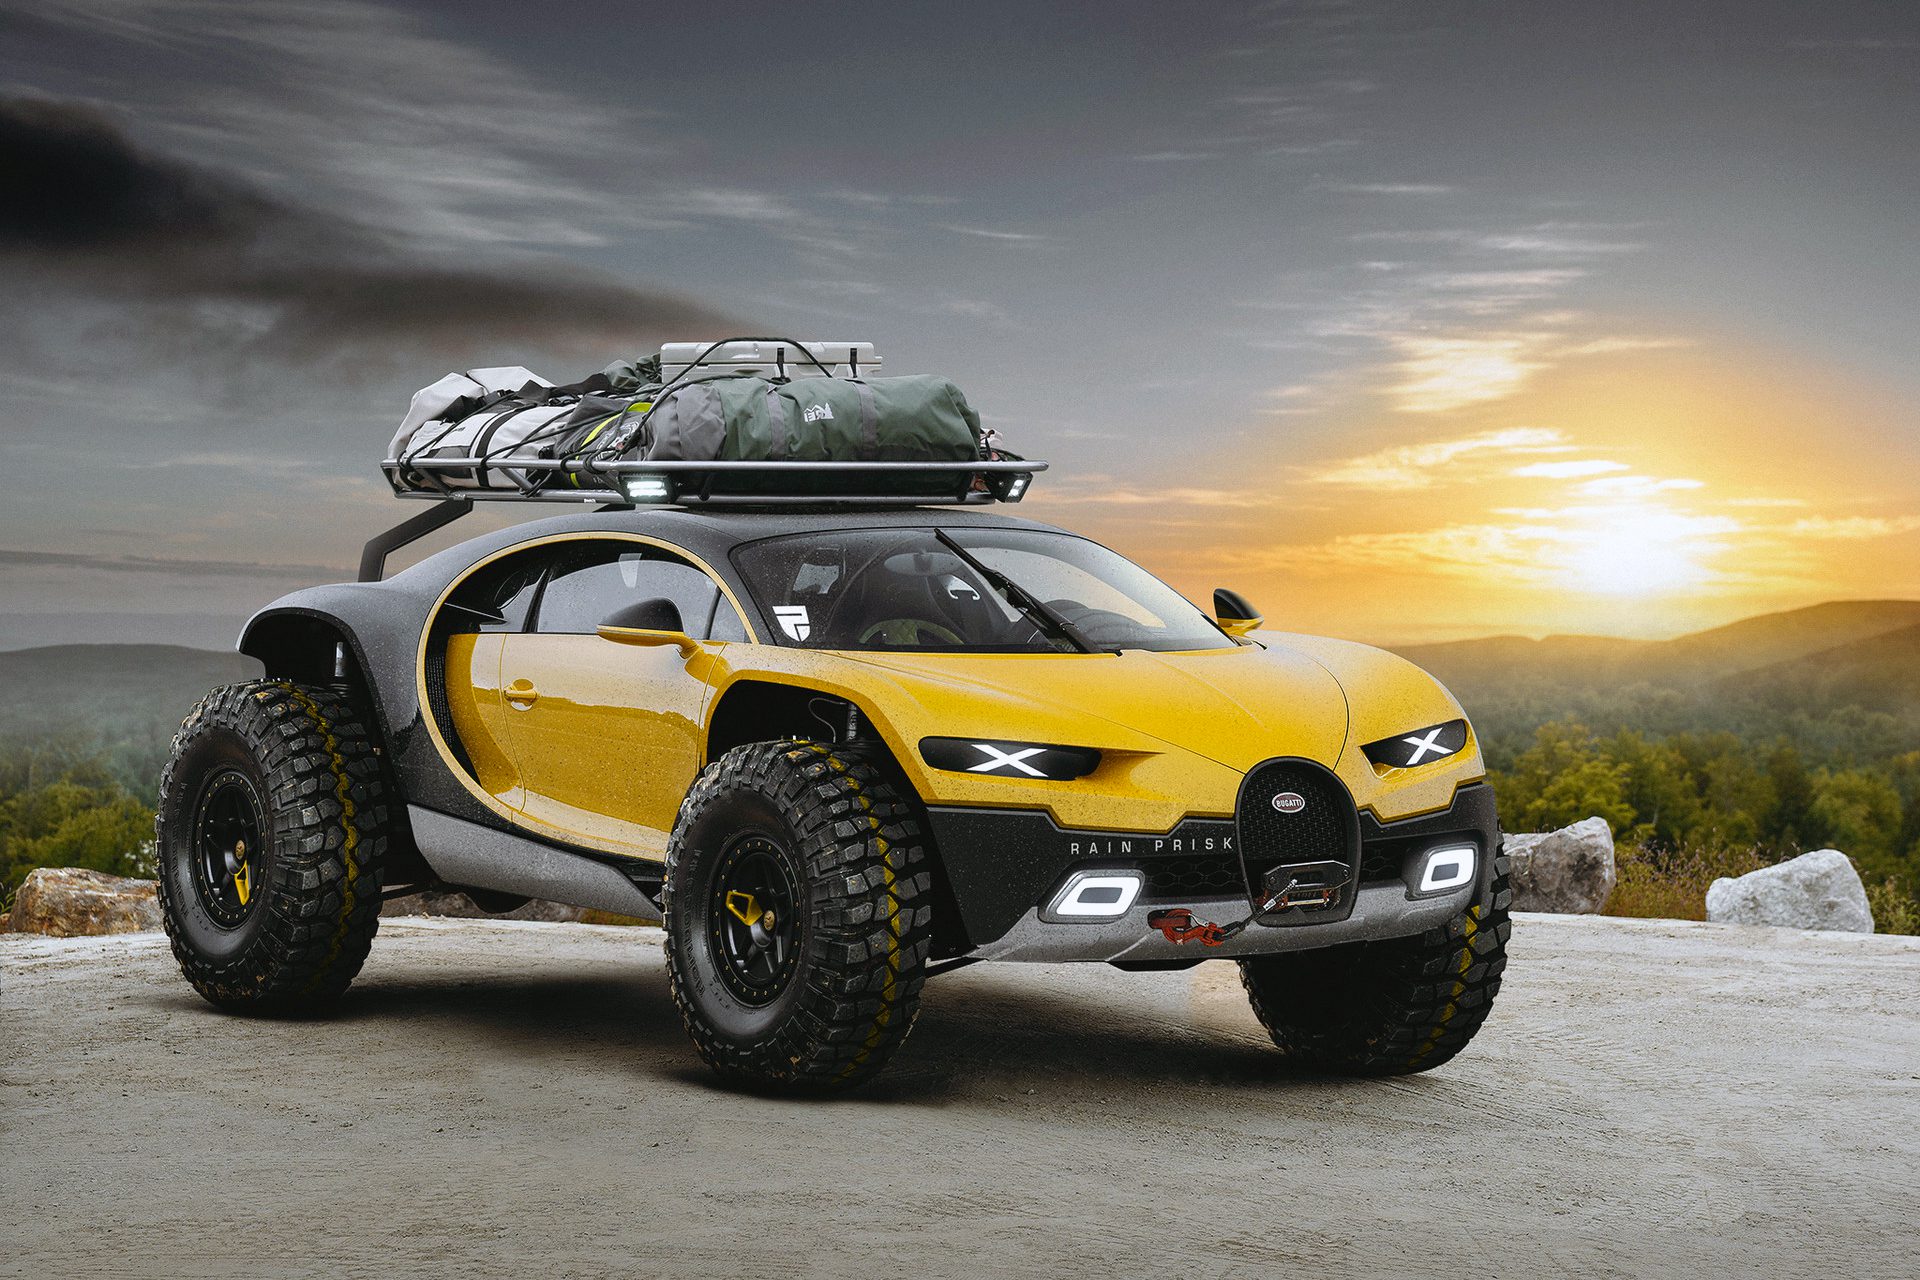 Off-road! These are the best all-terrain concept supercars